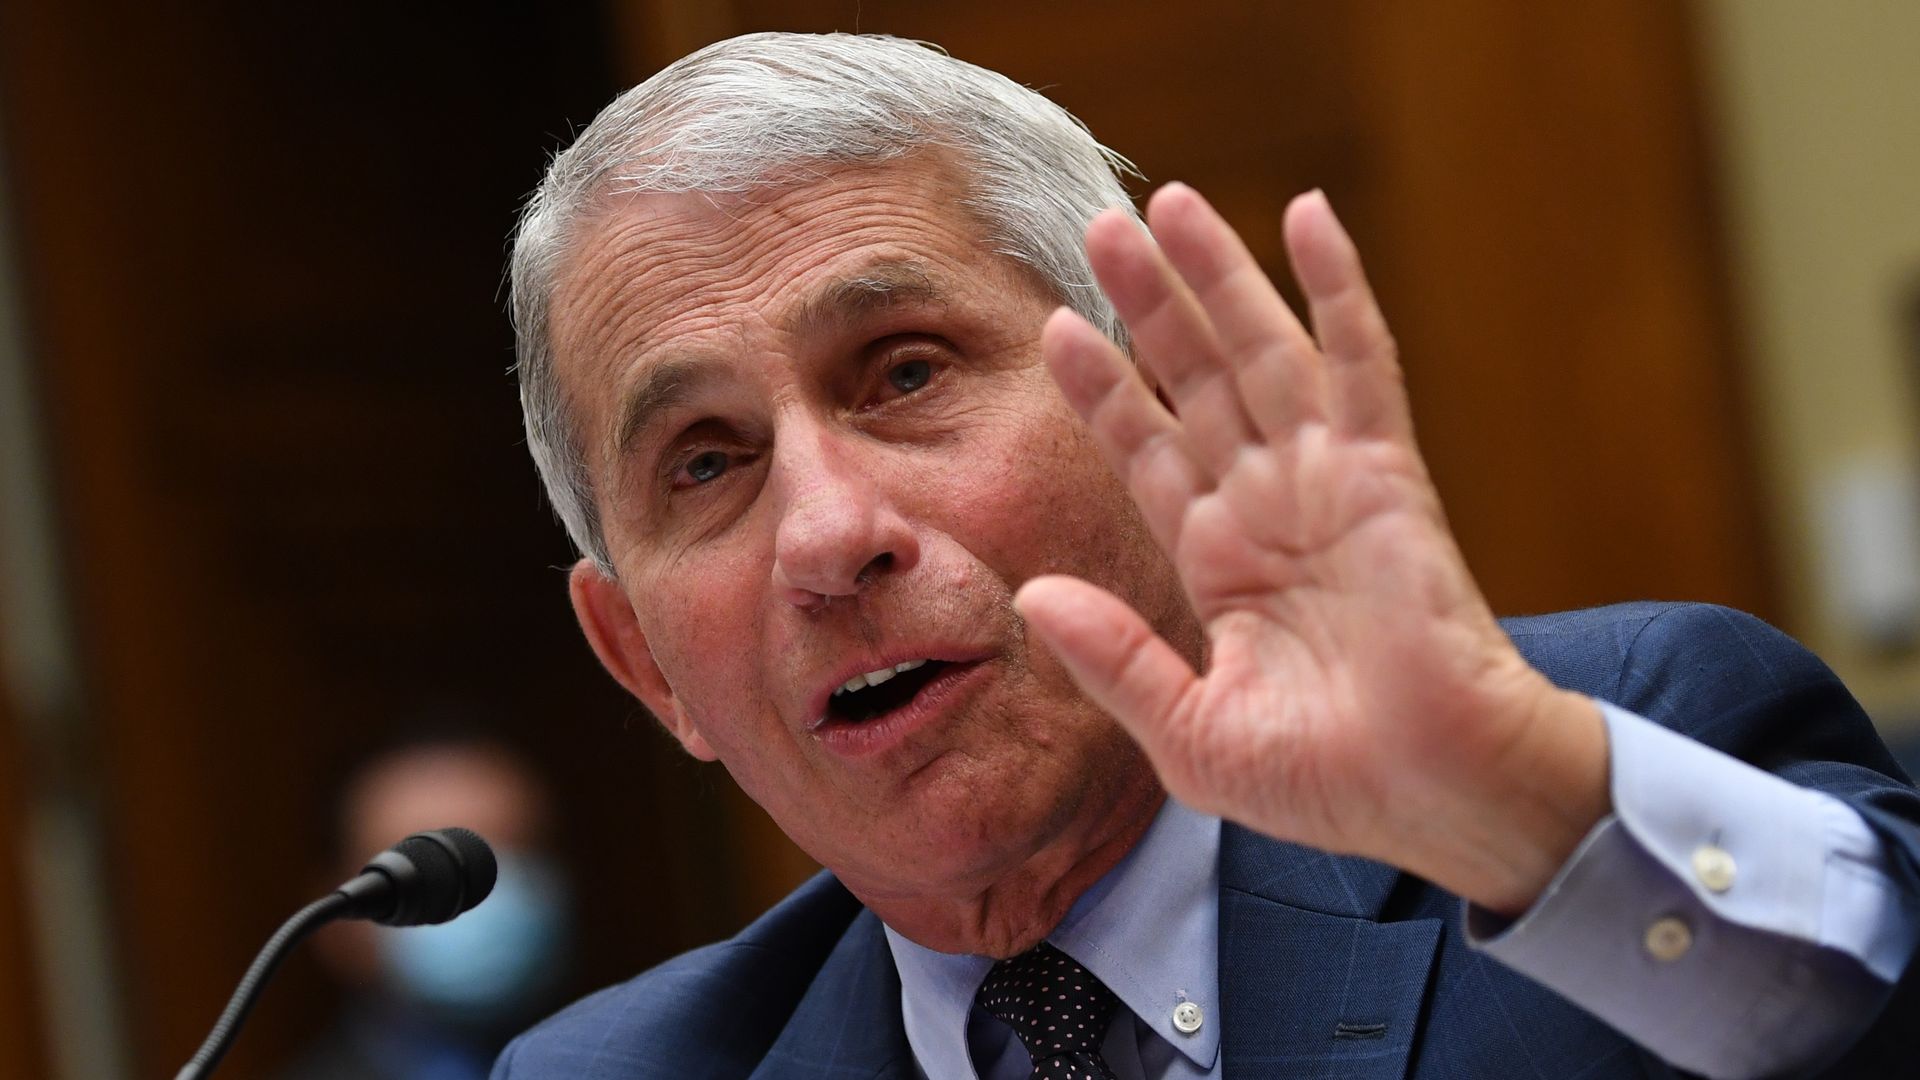 Dr. Anthony Fauci testifies before a House Subcommittee on the Coronavirus Crisis hearing on July 31